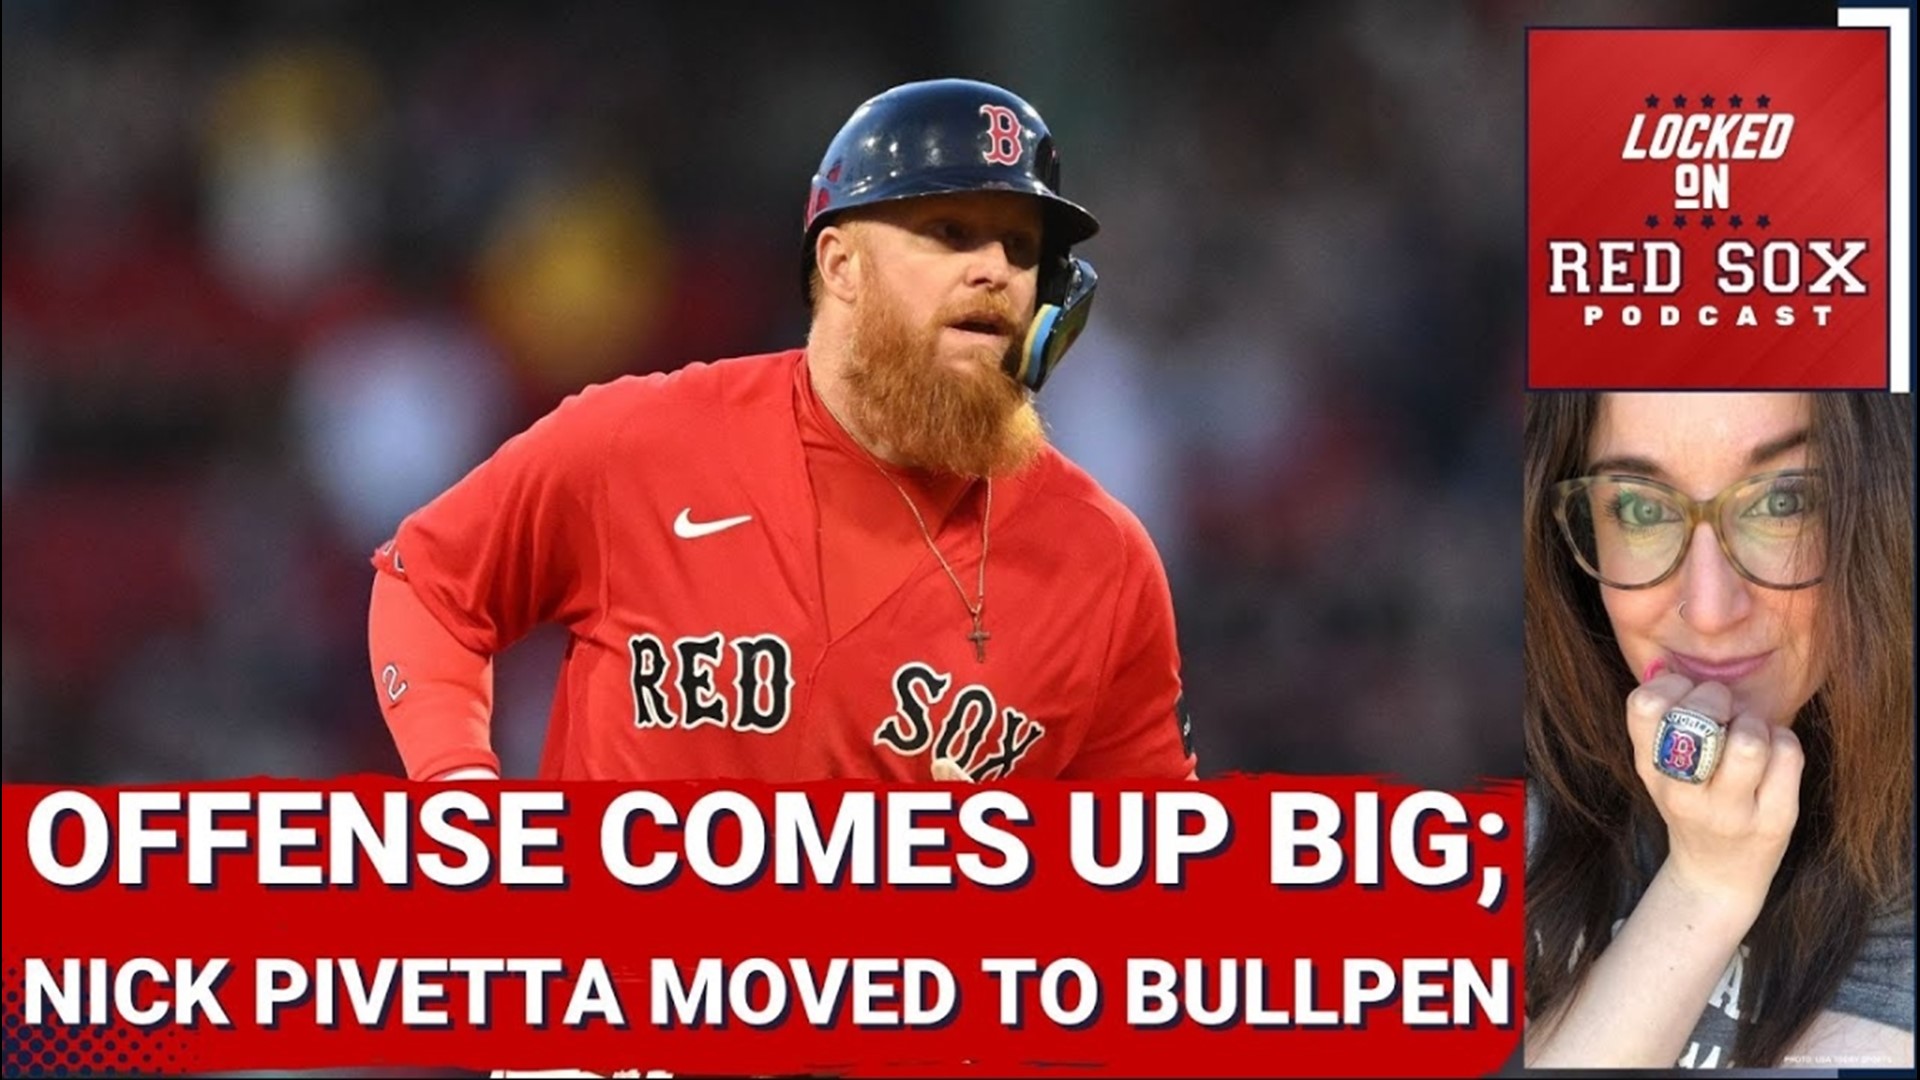 After the Red Sox beat the Mariners 12-3 on Wednesday night to win the series at Fenway Park, manager Alex Cora confirmed Pivetta would be moved to the bullpen.